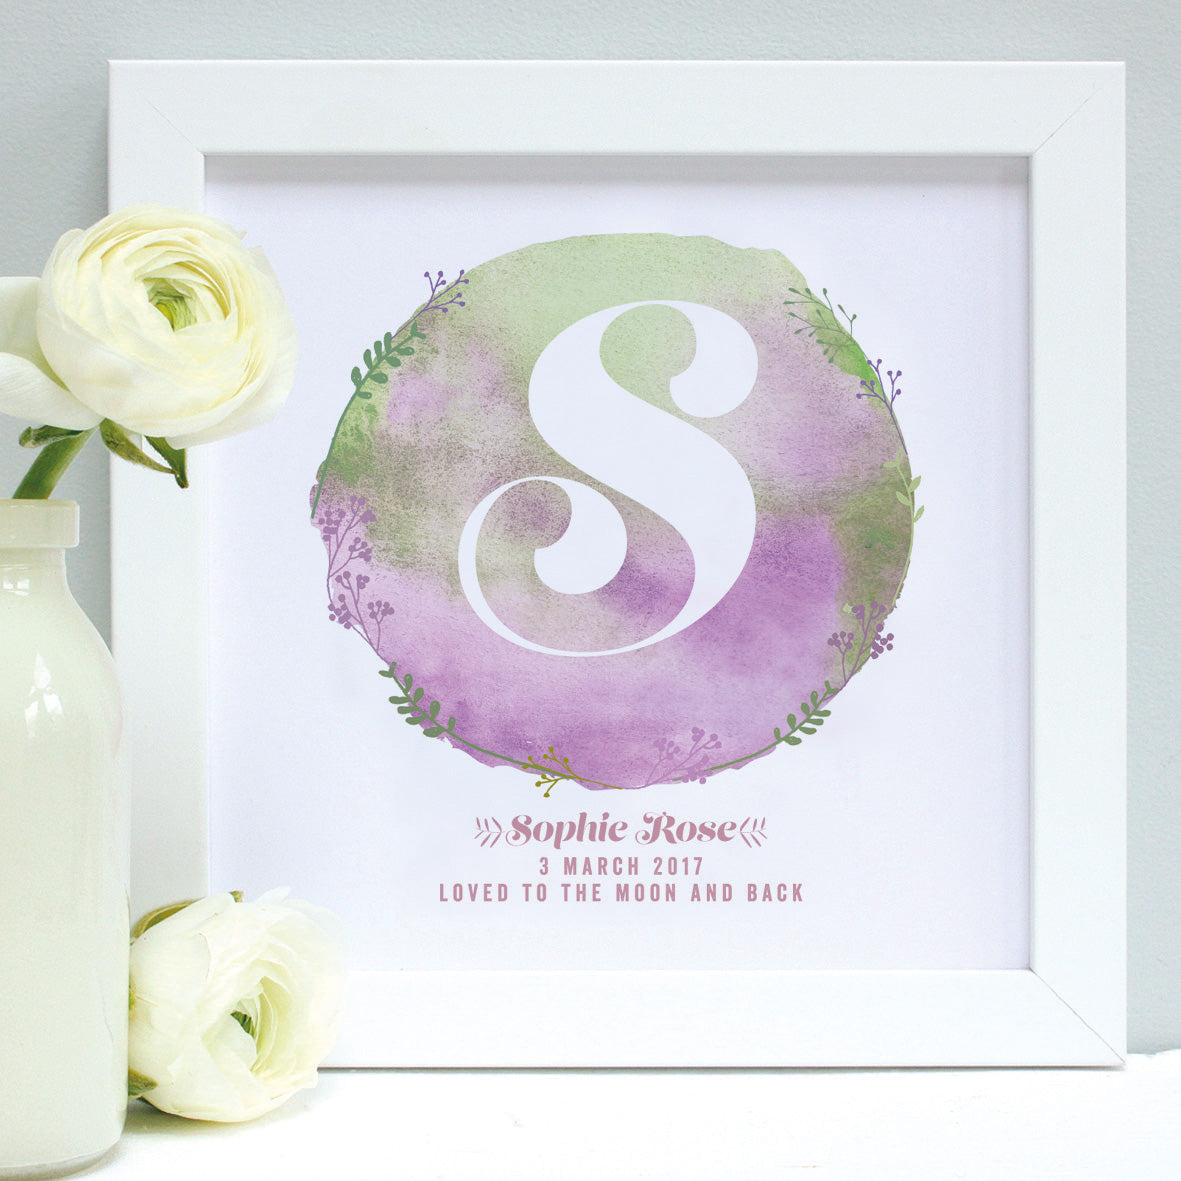 Personalised New Baby Watercolour Framed Print